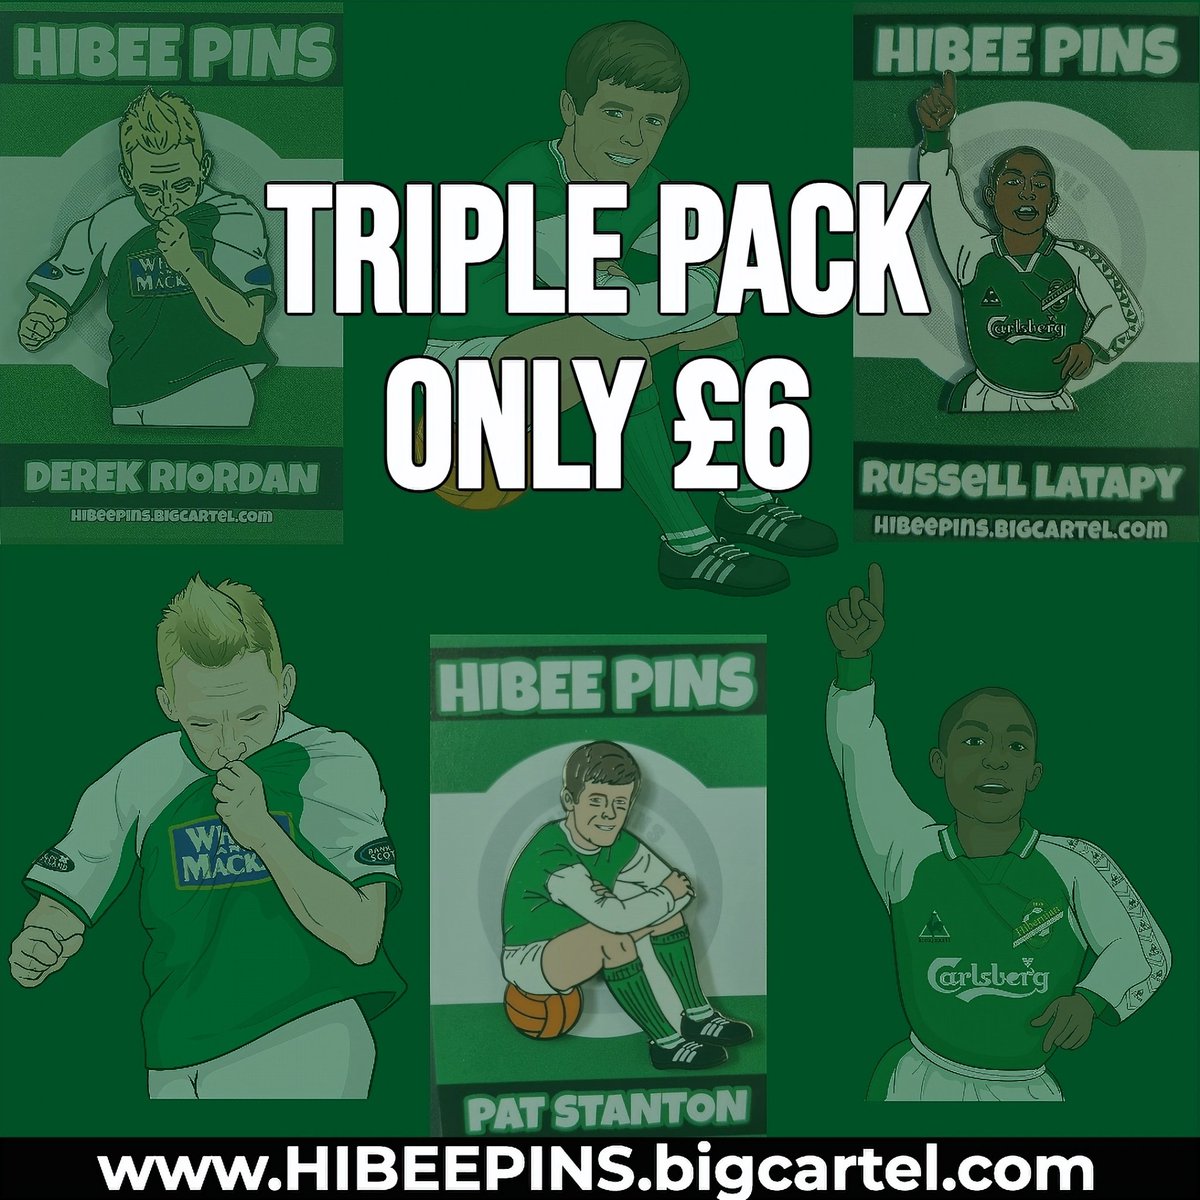 BRAVO #HibeePinners  🙌👏

Our #TriplePack is now #SoldOut BUT DO NOT WORRY, we still have an amazing deal with our #DoublePack 💚

#Latapy #Stanton for only £4 and they come with FREE stickers 🔥

Make sure you grab yours before they sell out 

🟢 HIBEEPINS.bigcartel.com 🟢